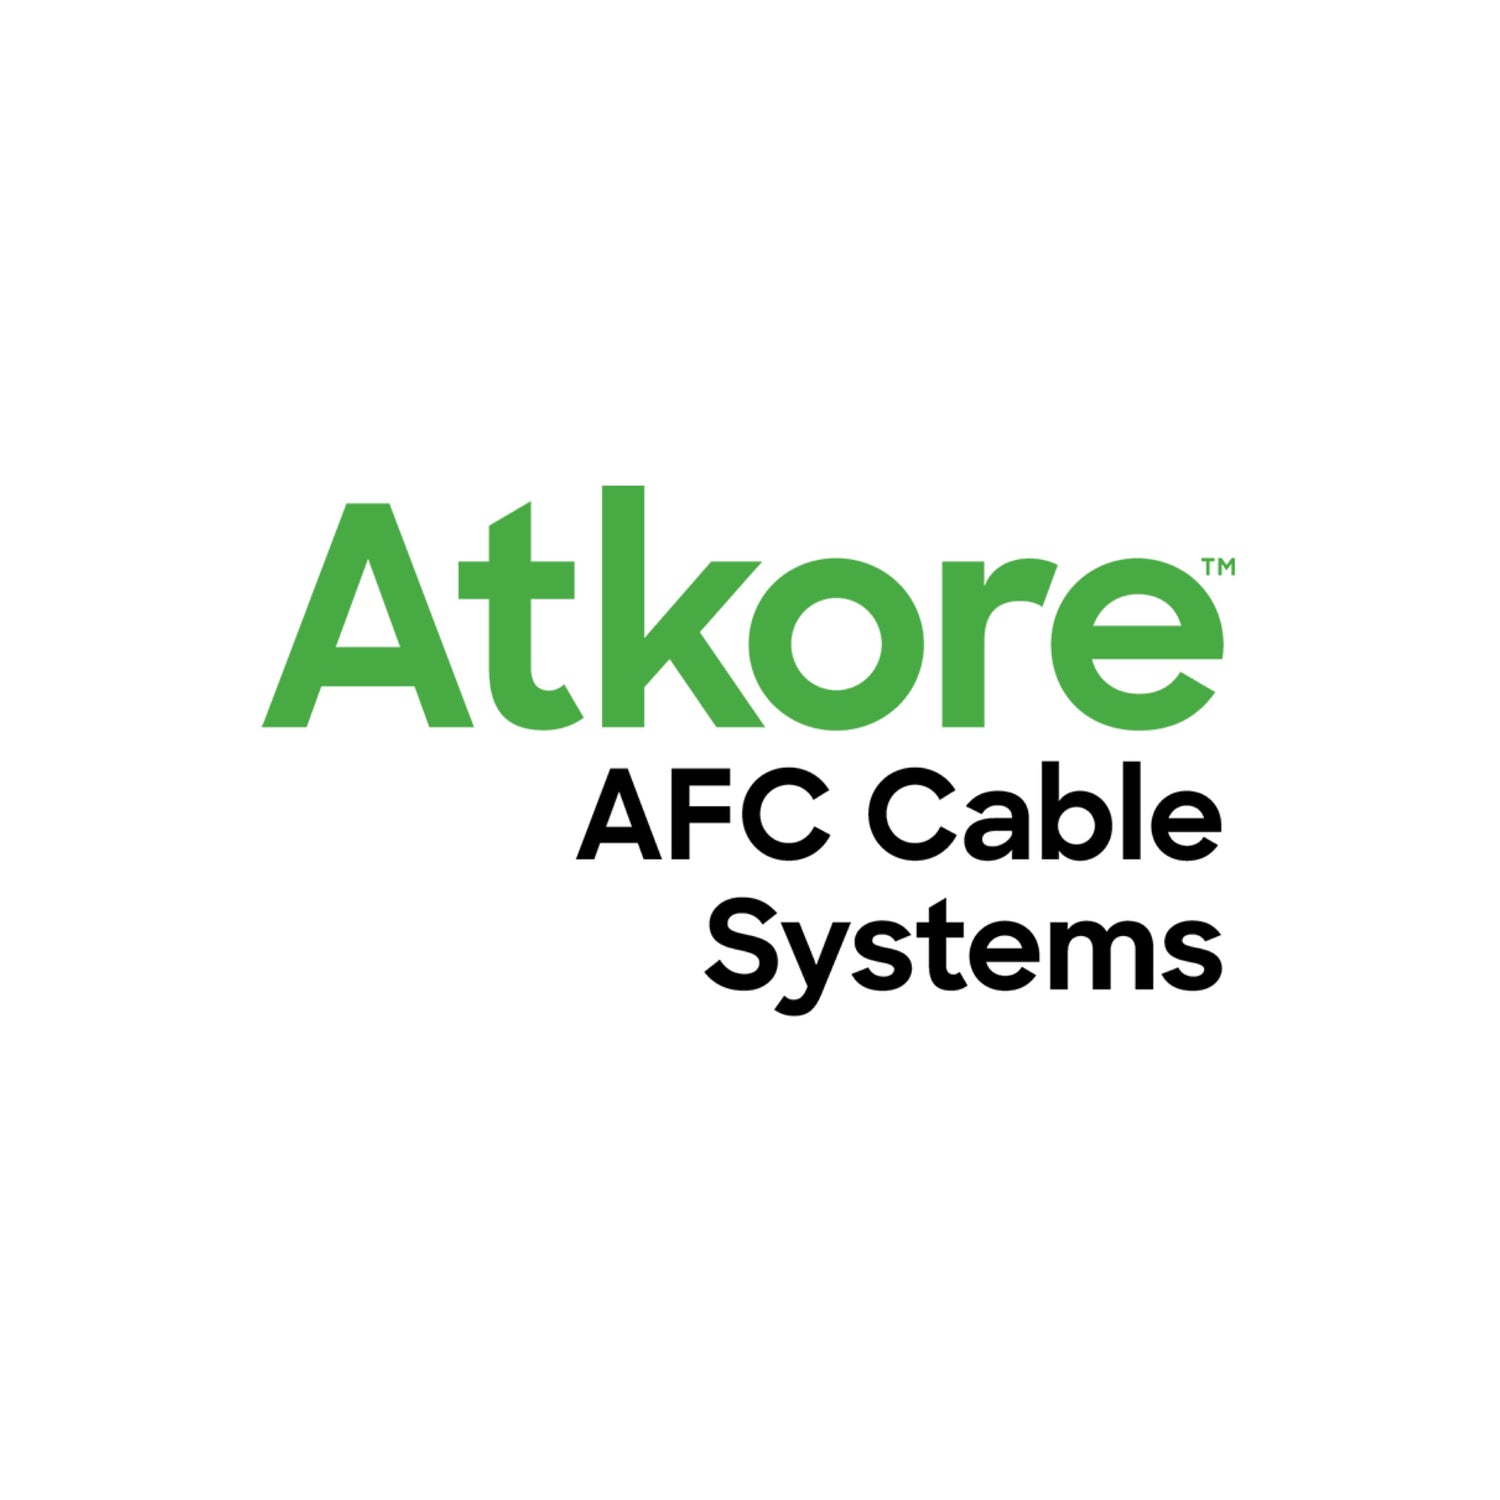 ATKORE AFC CABLE SYSTEMS